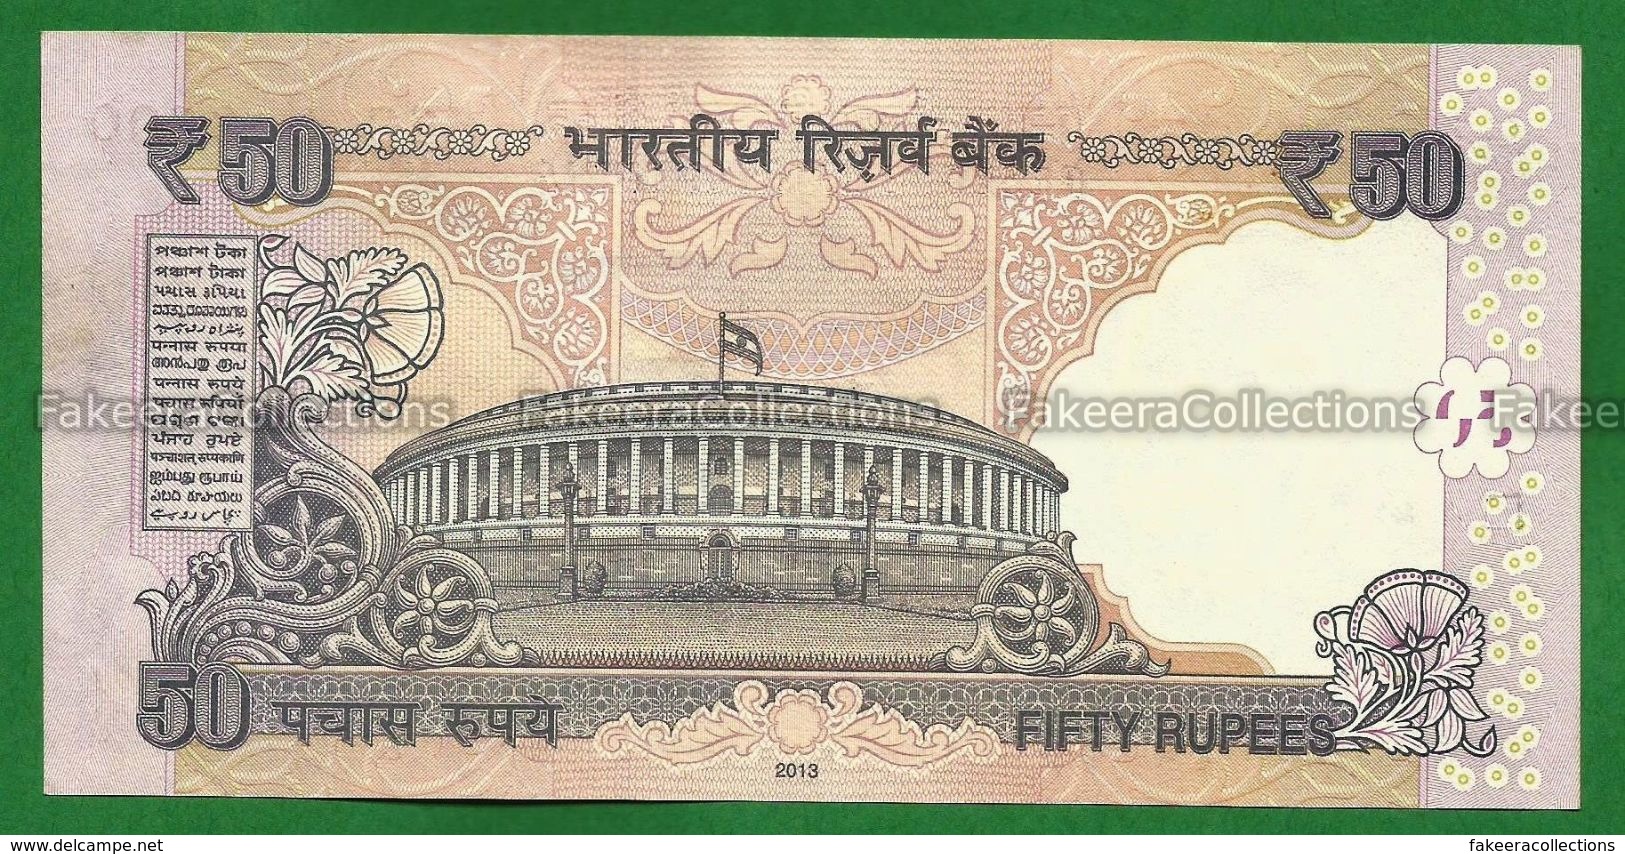 India Inde Indien - 50 Rupees / INR Banknote P-104b(1) - 2013 UNC (Without Letter) D. Subbarao - As Scan - India